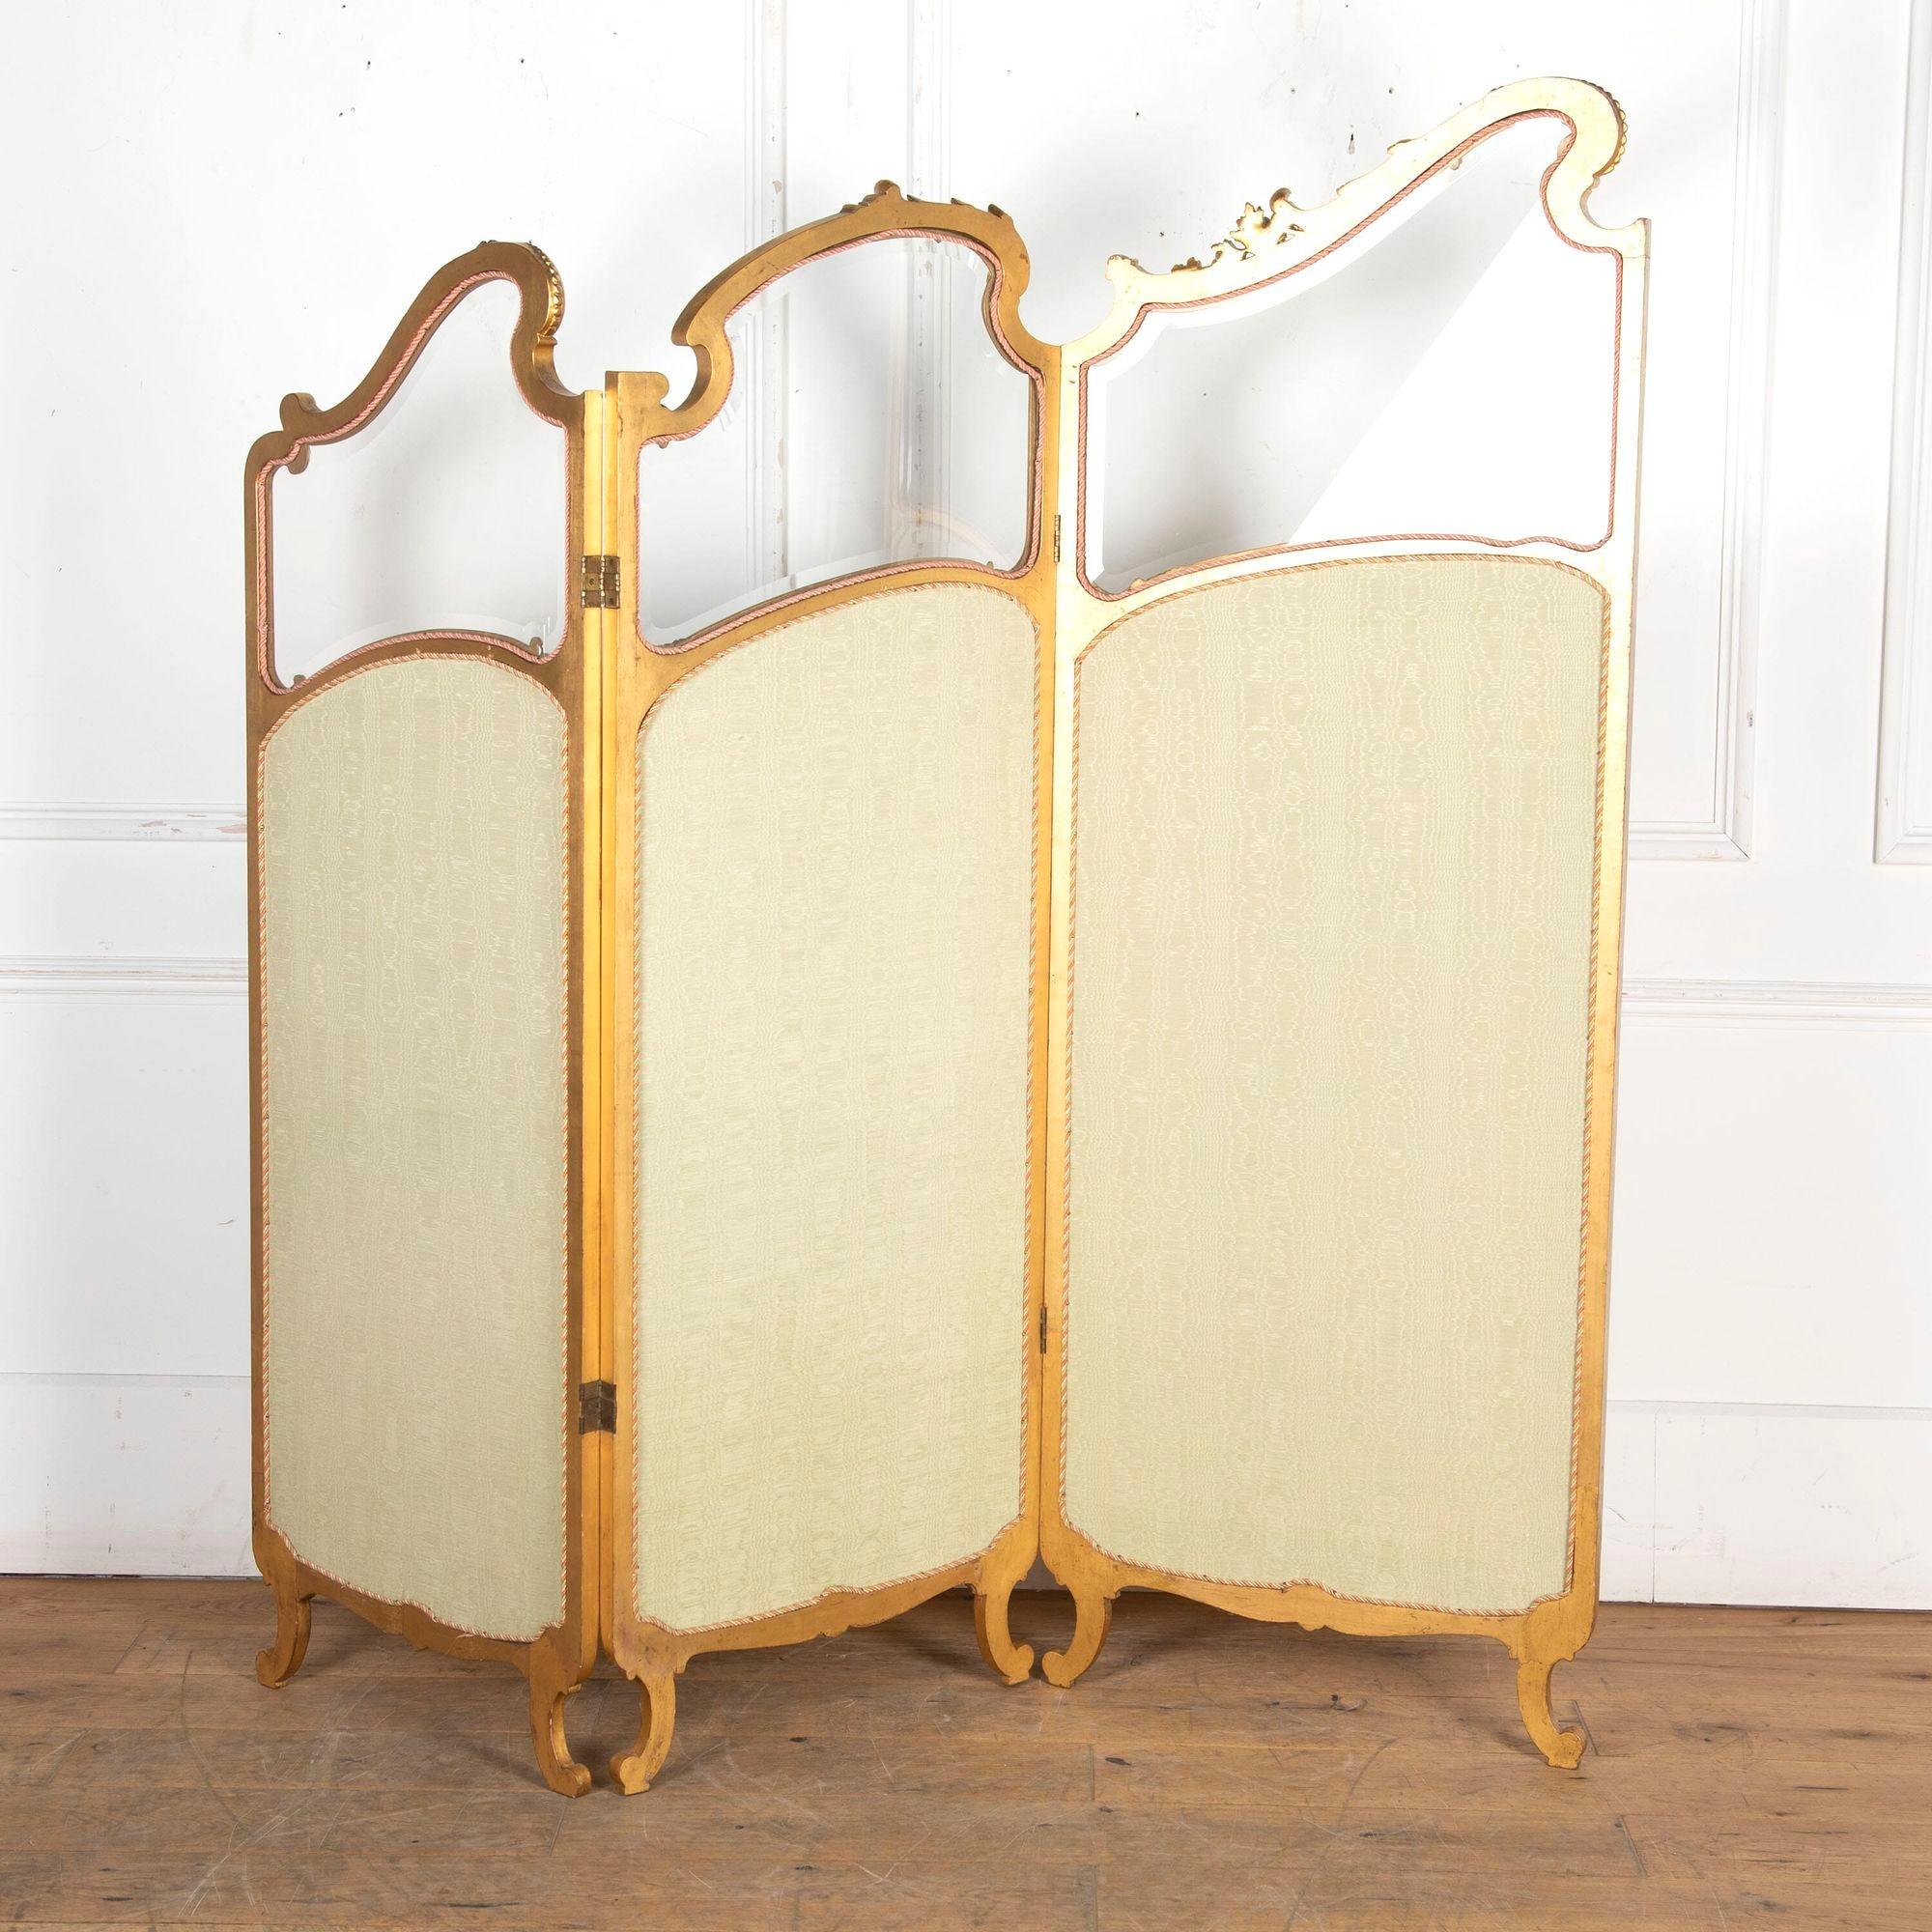 19th Century French Upholstered Three Fold Screen In Good Condition For Sale In Gloucestershire, GB